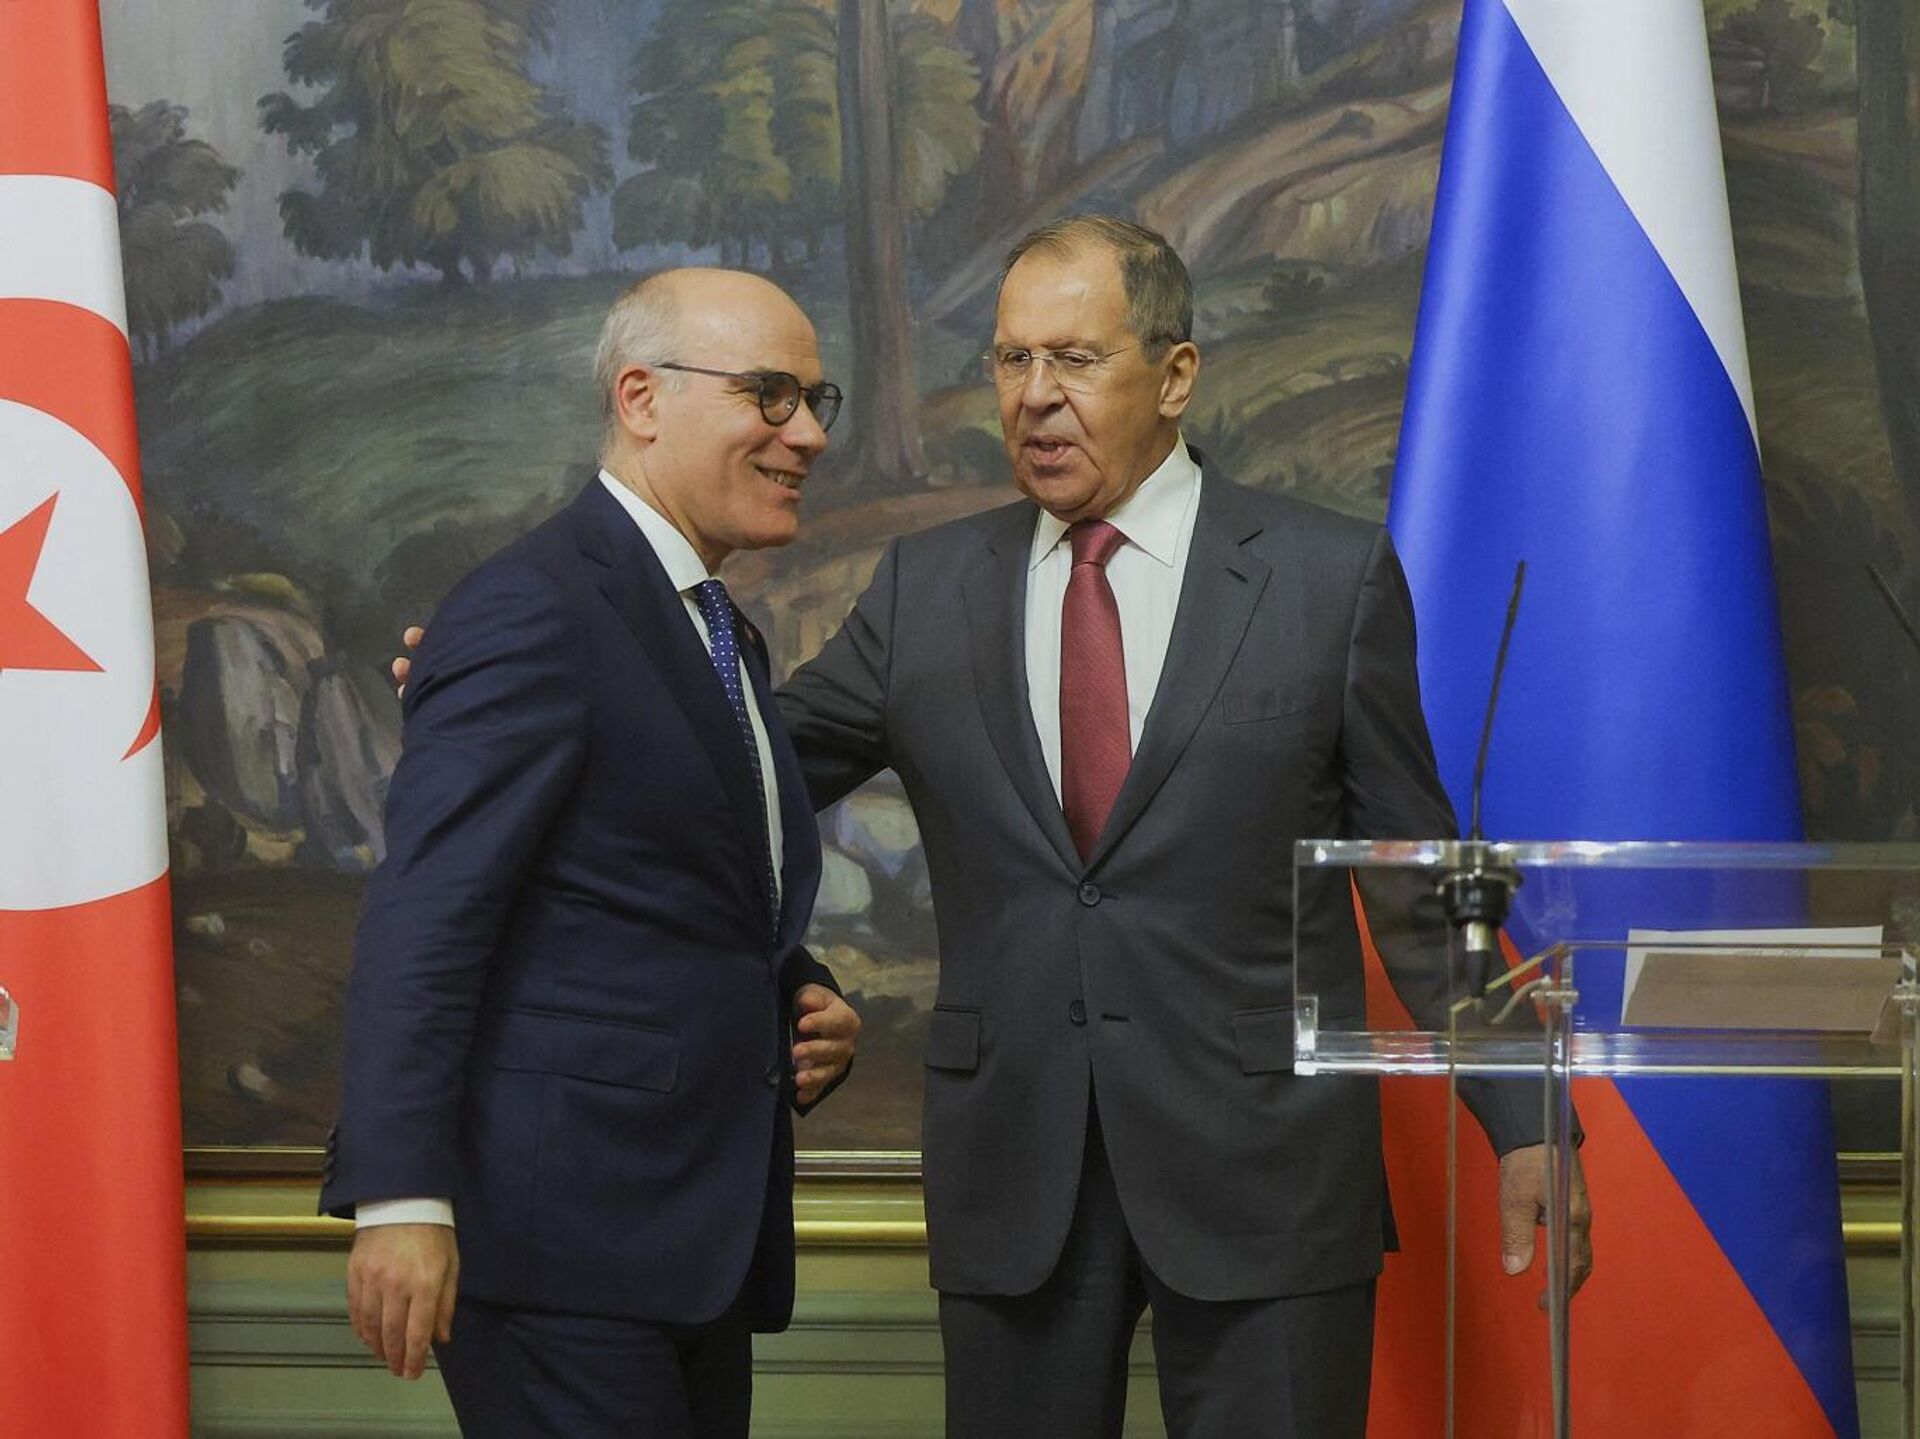 Why Tunisia is looking eastward to Russia?